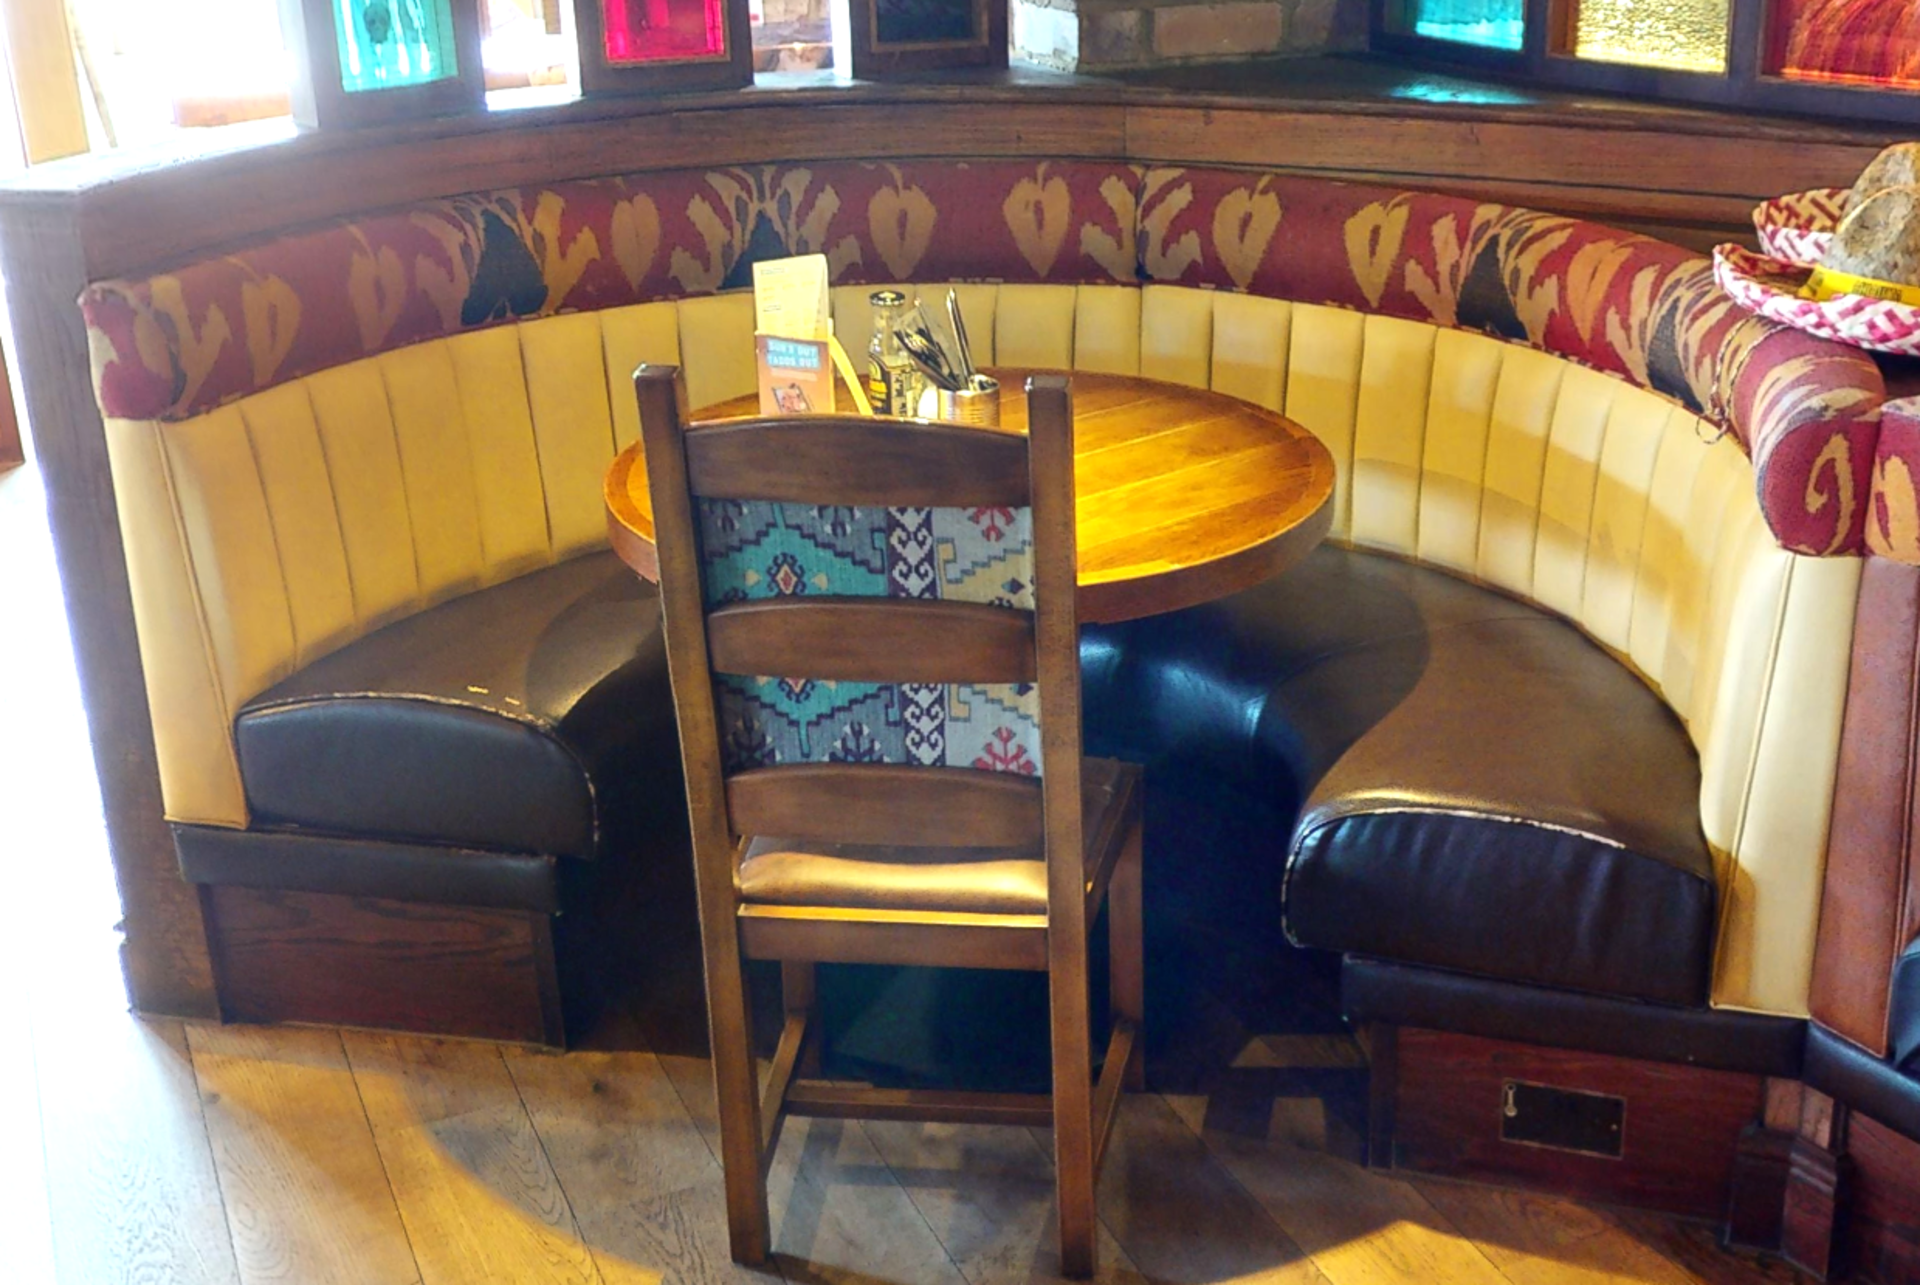 1 x Restaurant C Shape Seating Booth - Features Brown Faux Leather Seat Pads and Yellow Ribbed - Image 2 of 2